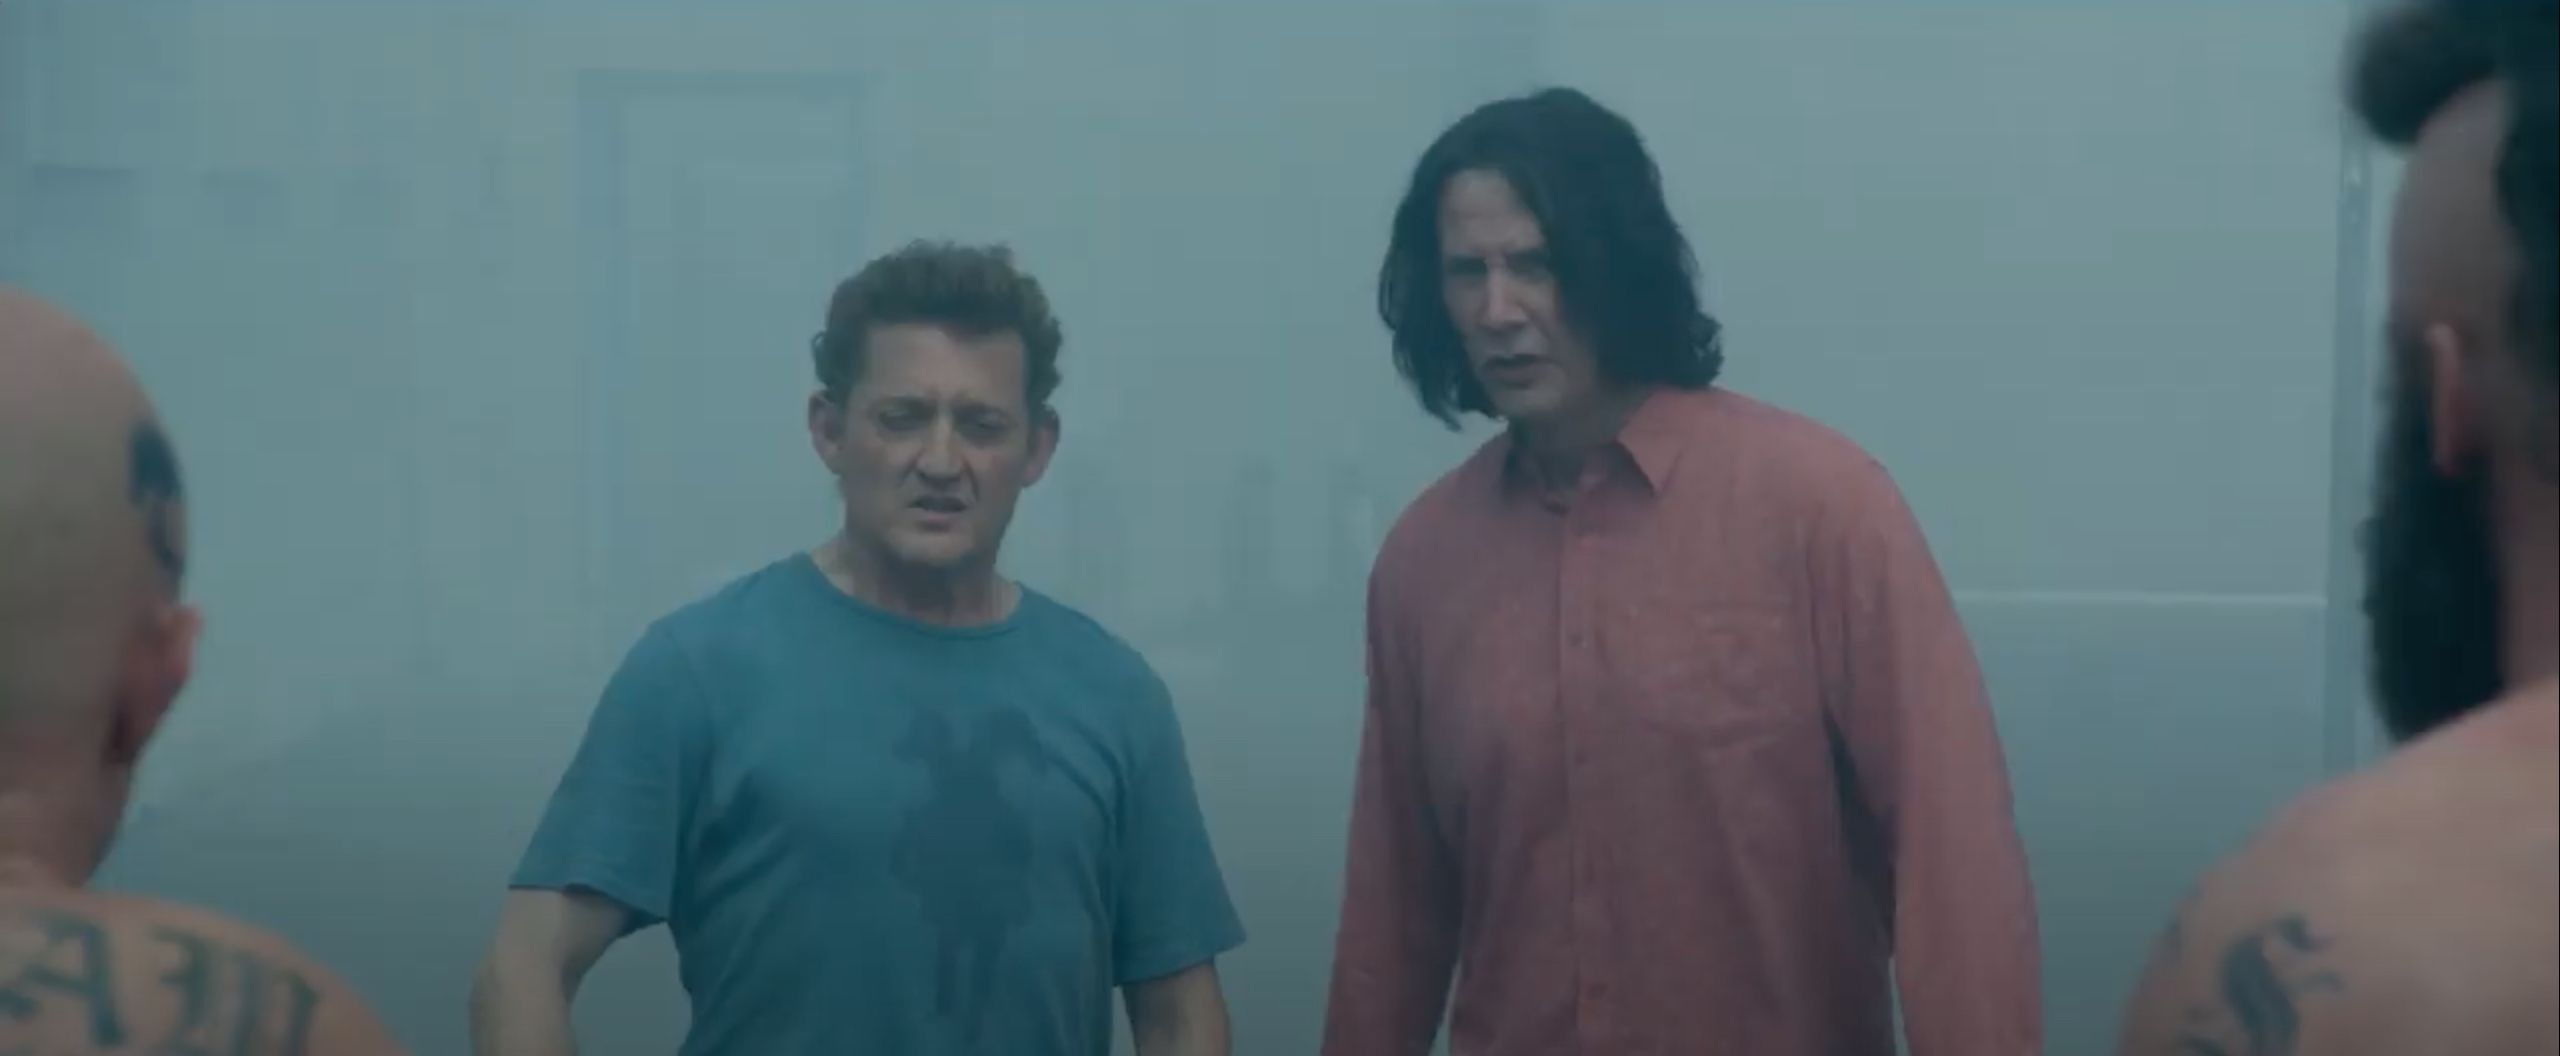 Bill and Ted Face The Music Trailer Image #32